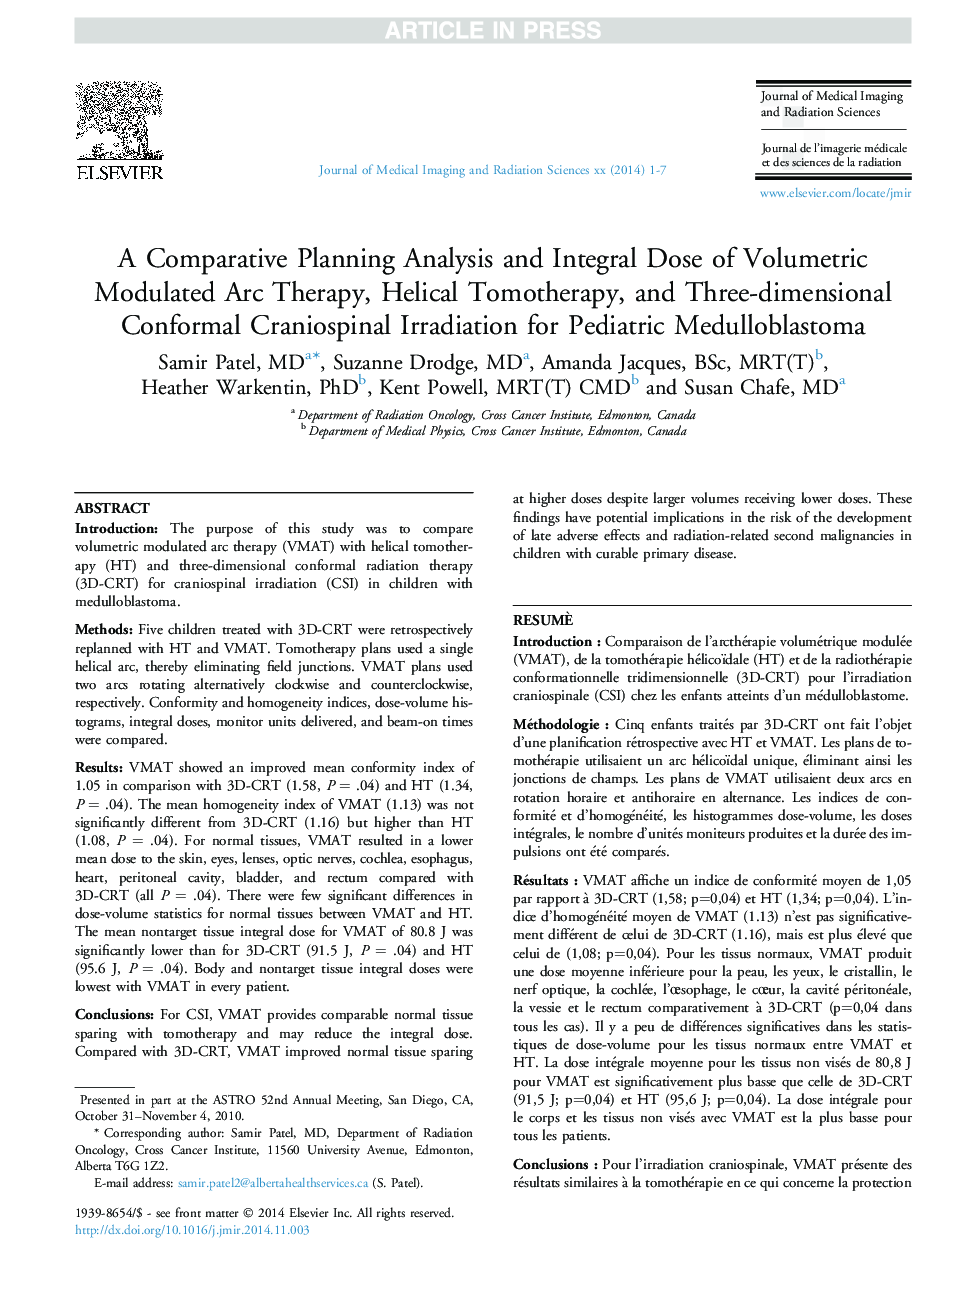 A Comparative Planning Analysis and Integral Dose of Volumetric Modulated Arc Therapy, Helical Tomotherapy, and Three-dimensional Conformal Craniospinal Irradiation for Pediatric Medulloblastoma